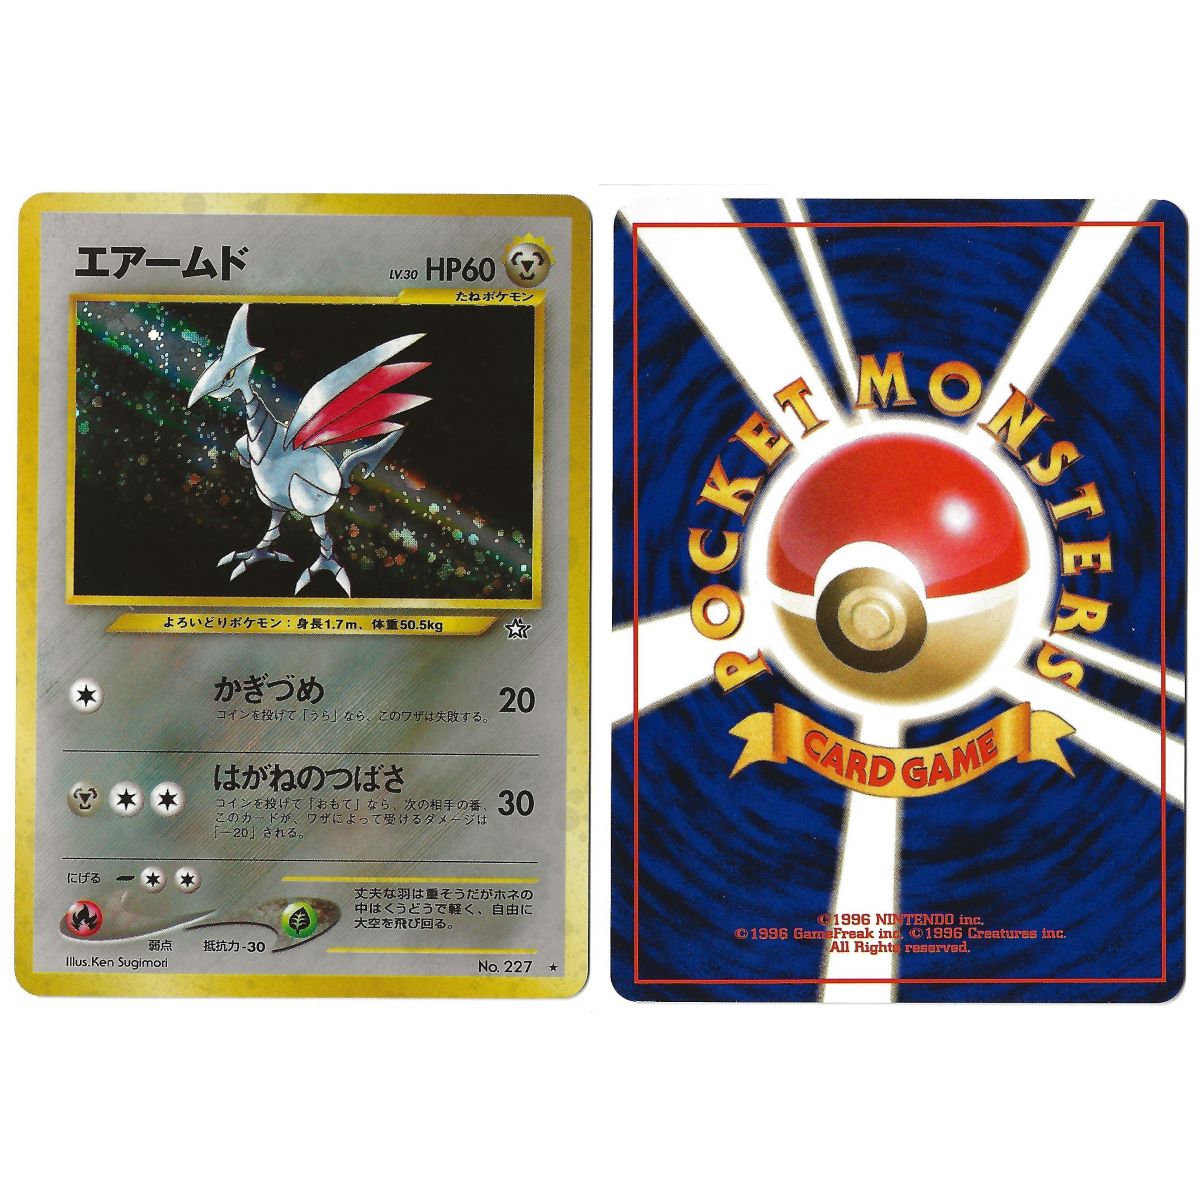 Skarmory (2) No.227 Gold, Silver, to a New World... N1 Holo Unlimited Japanese View Scan